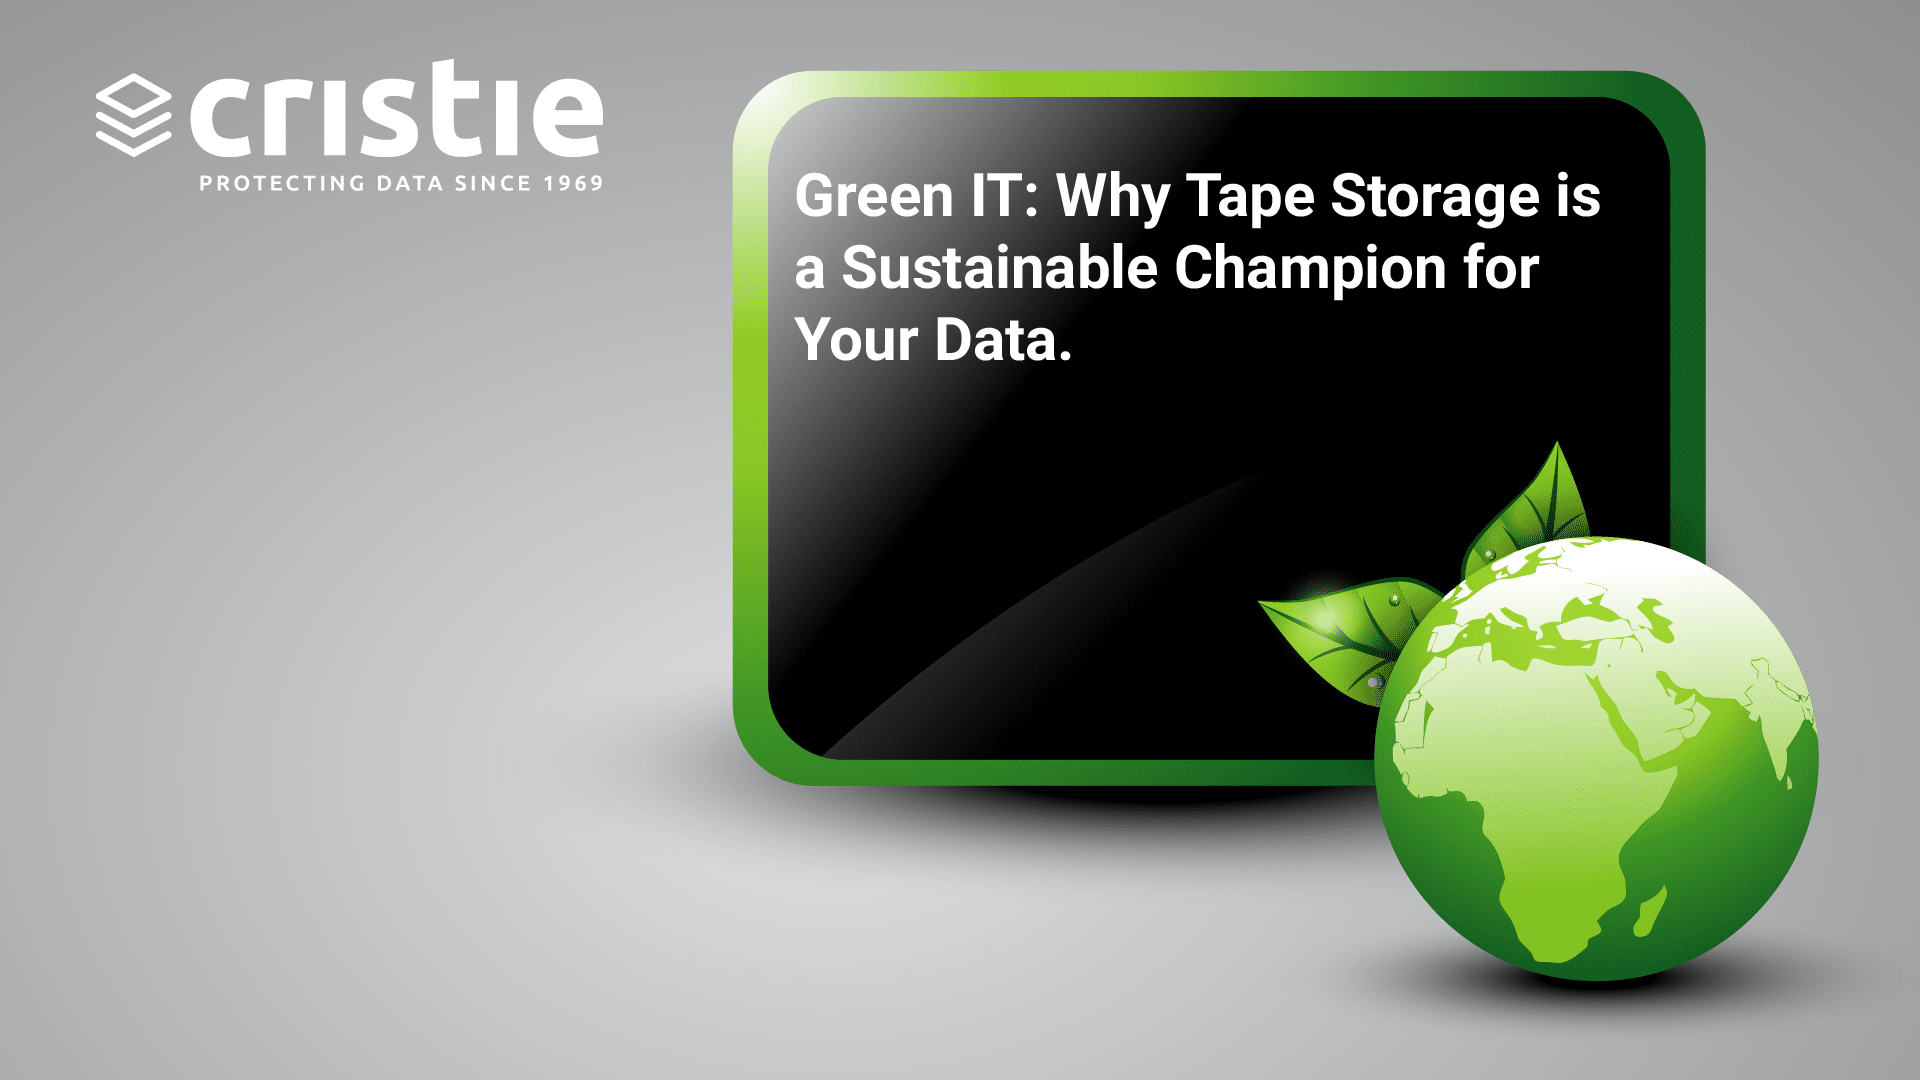 Green IT: Why Tape Storage is a Sustainable Champion for Your Data